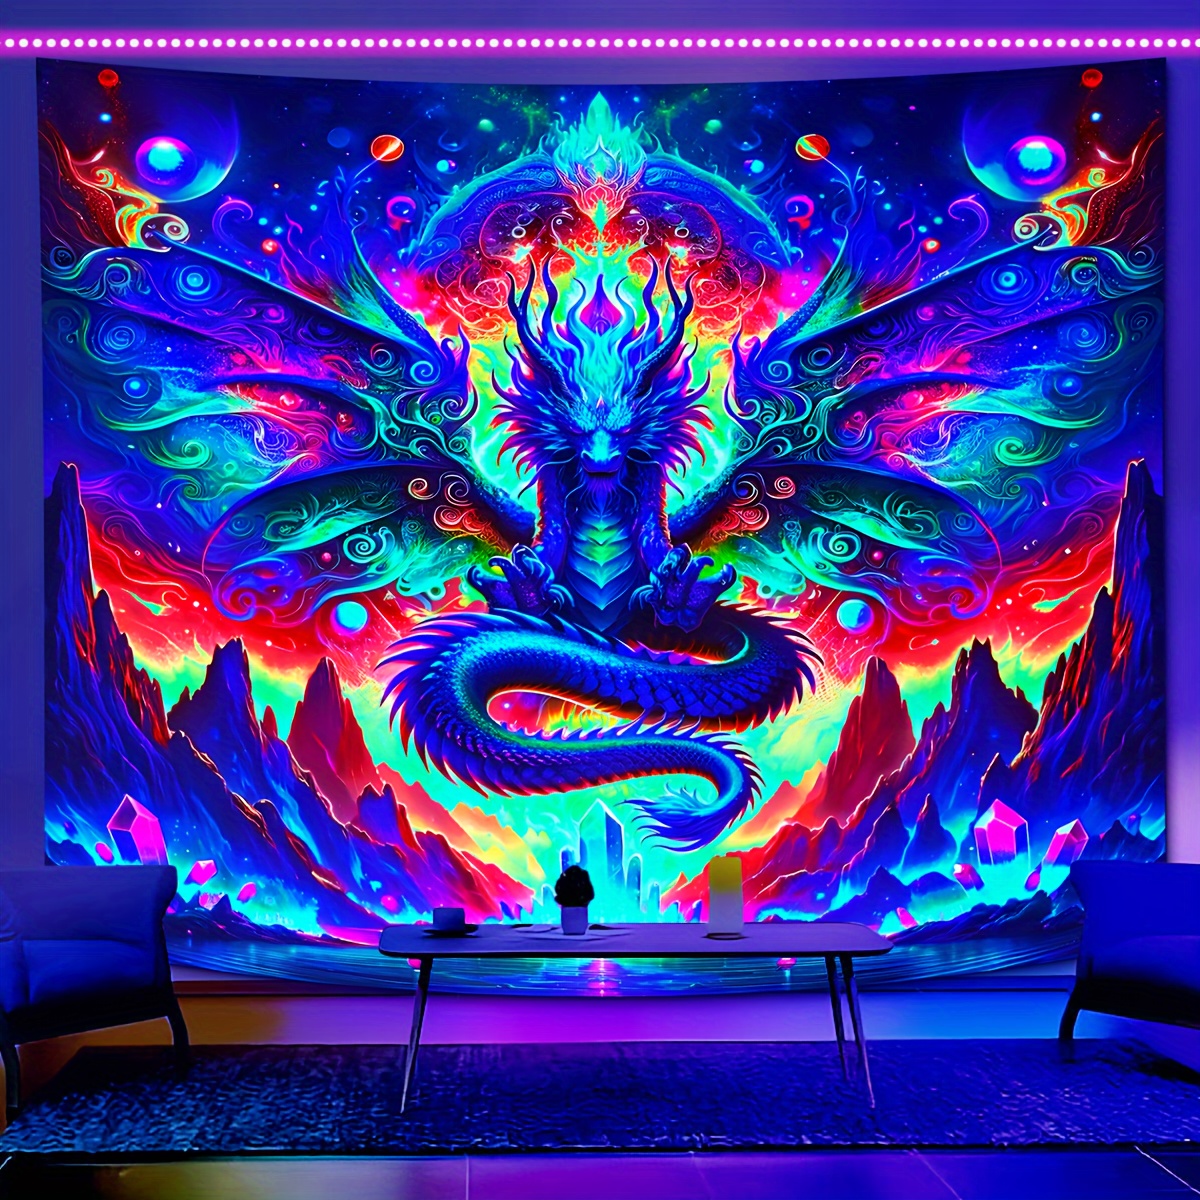 

1pc Uv Blacklight Fluorescent Dragon Tapestry - Fantasy Woven Polyester Indoor Wall Hanging For Living Room, Bedroom, Dorm Decor With Free Installation Kit